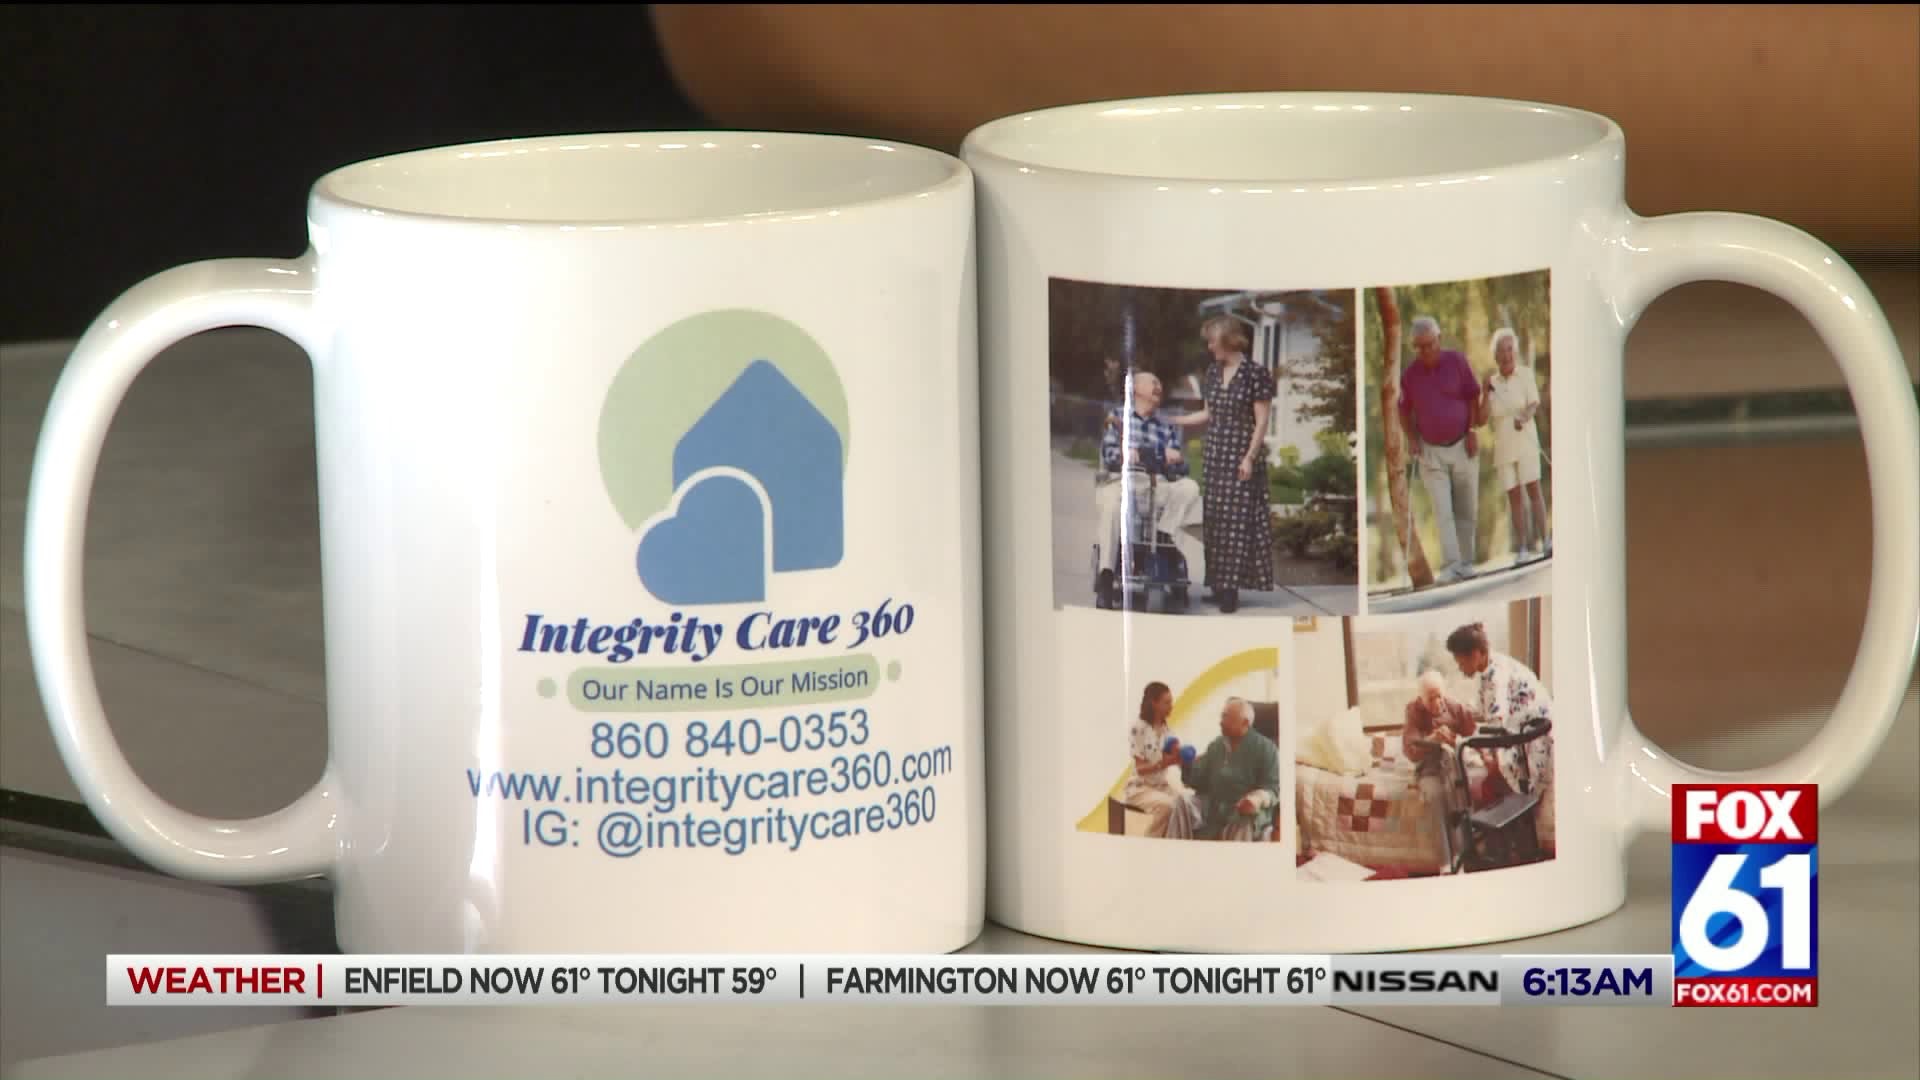 Integrity Care 360